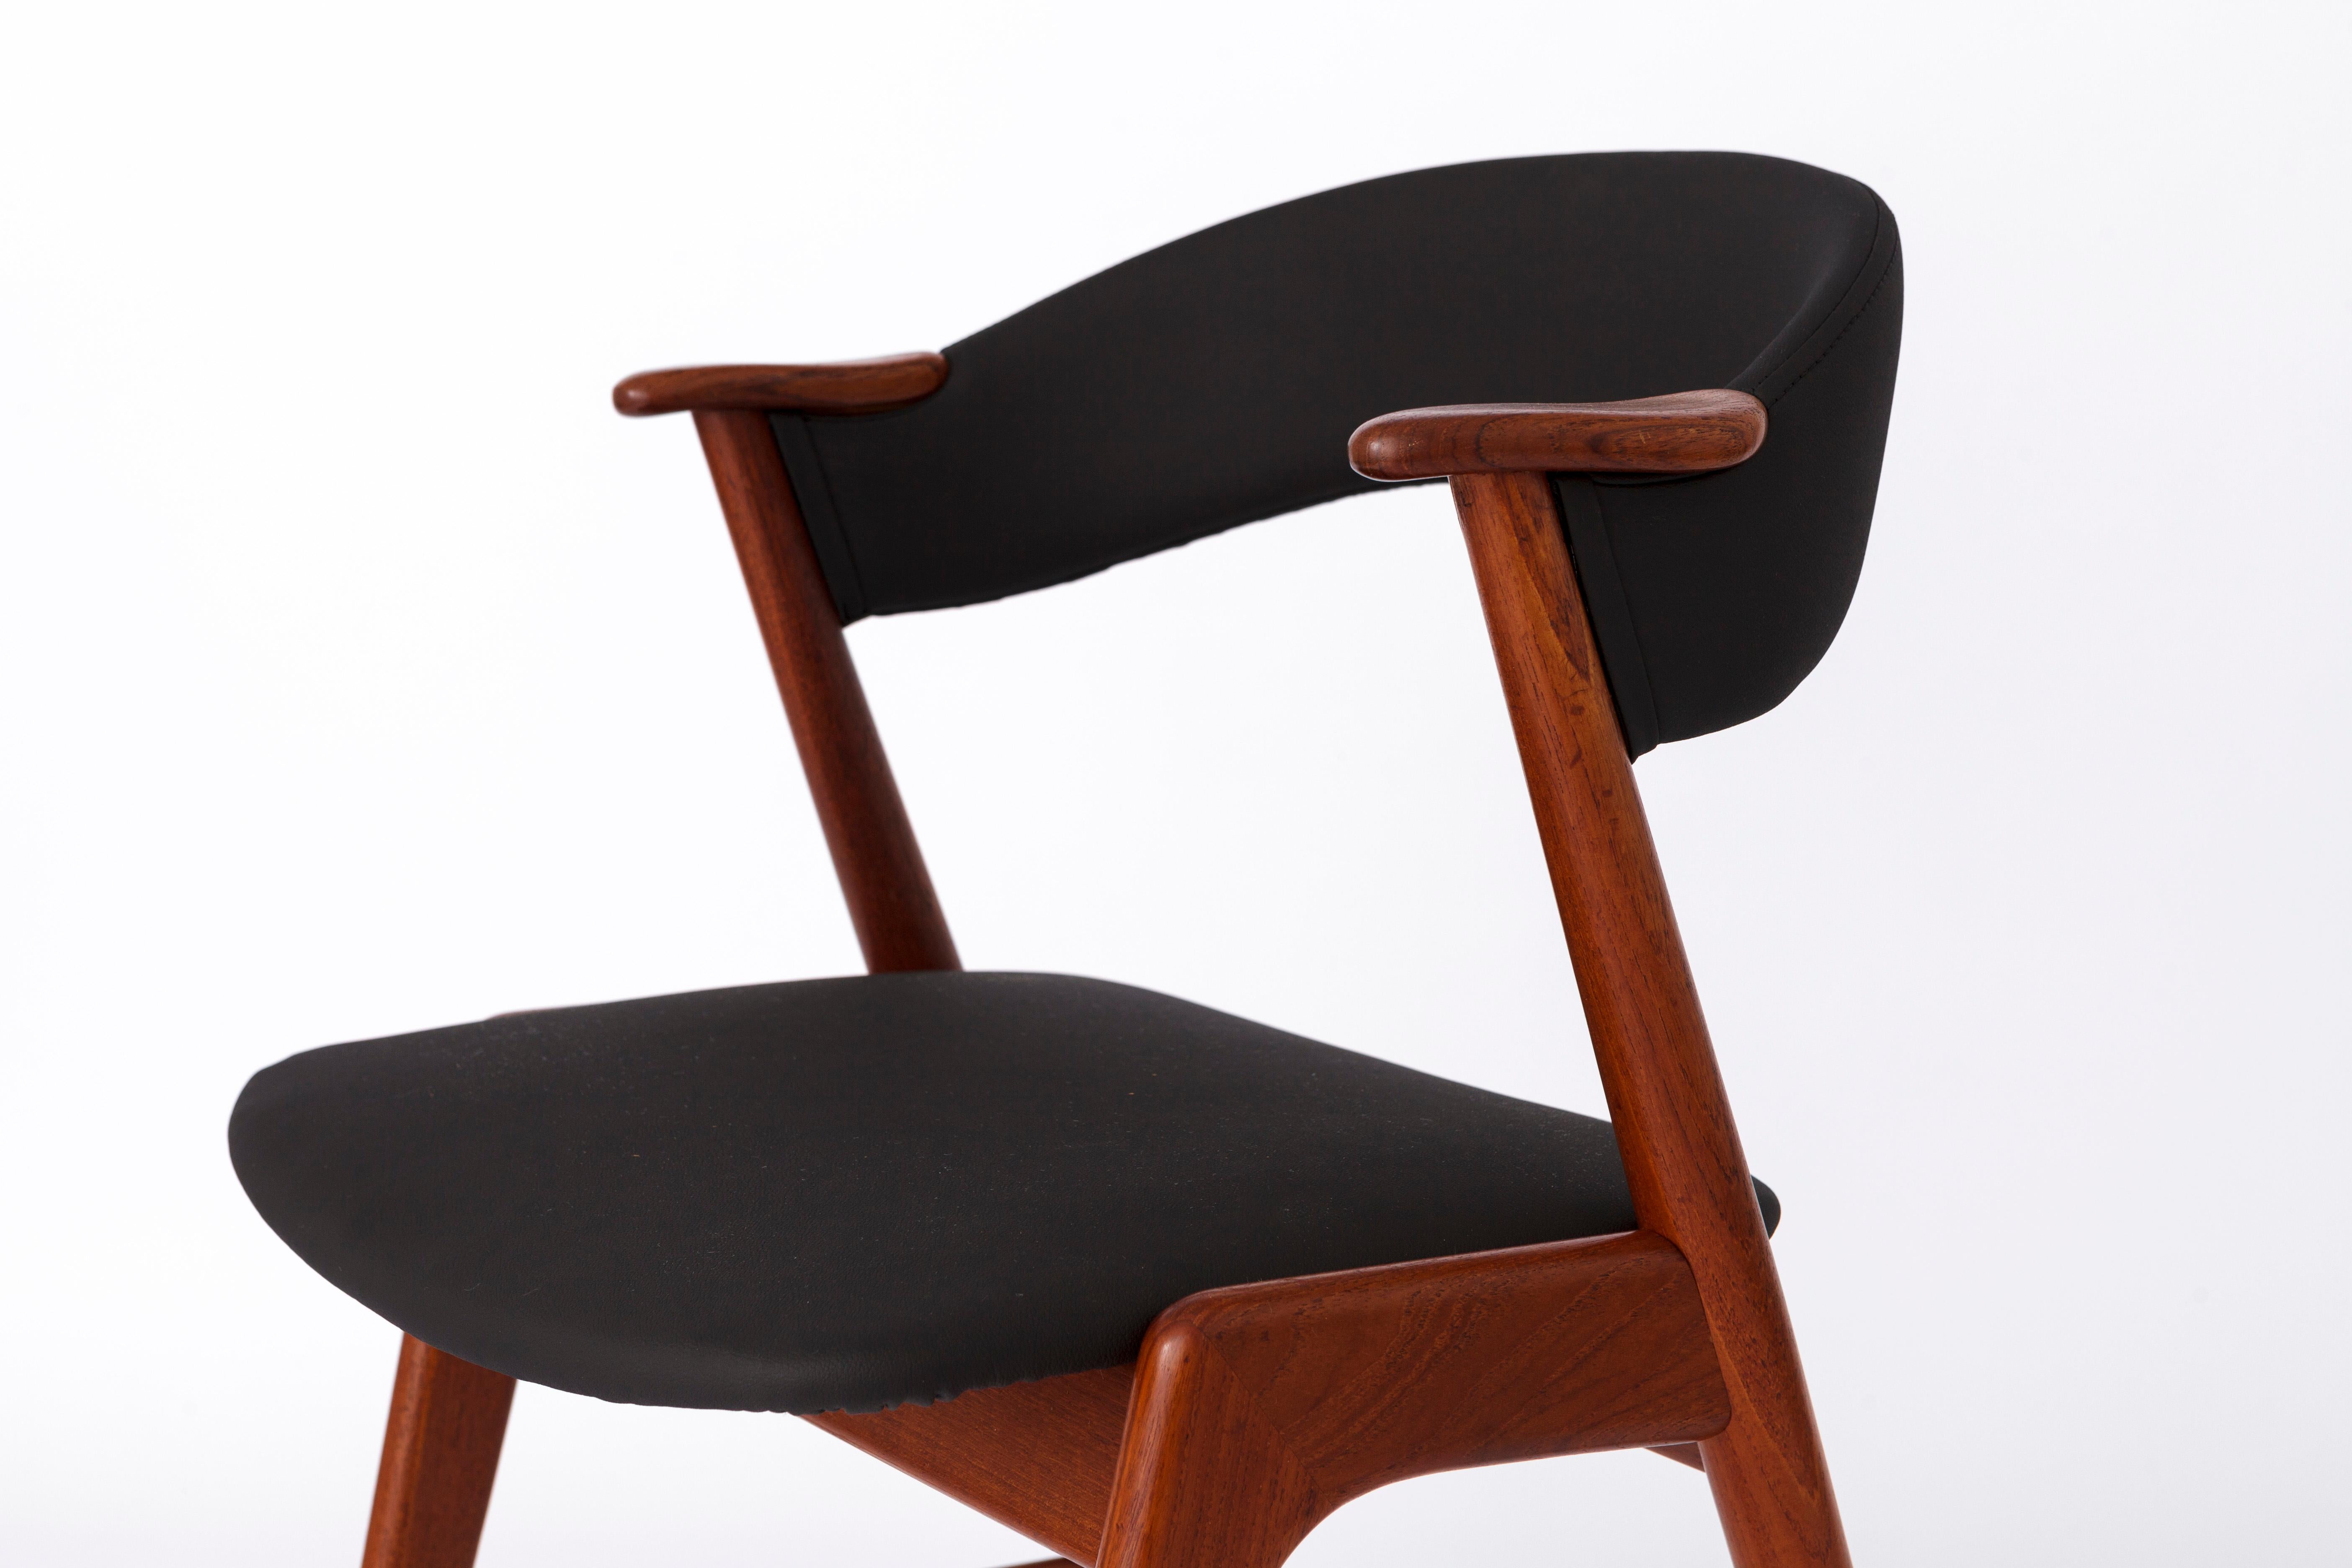 Vintage teak chair designed presumably by Henry Kjaernulf for 
manufacturer Korup Stolefabrik, Denmark in the 1960s. 
Ideal as desk or dining chair!

Sturdy teak chair frame. Refurbished and oiled. 
The seat and back part were reupholstered with